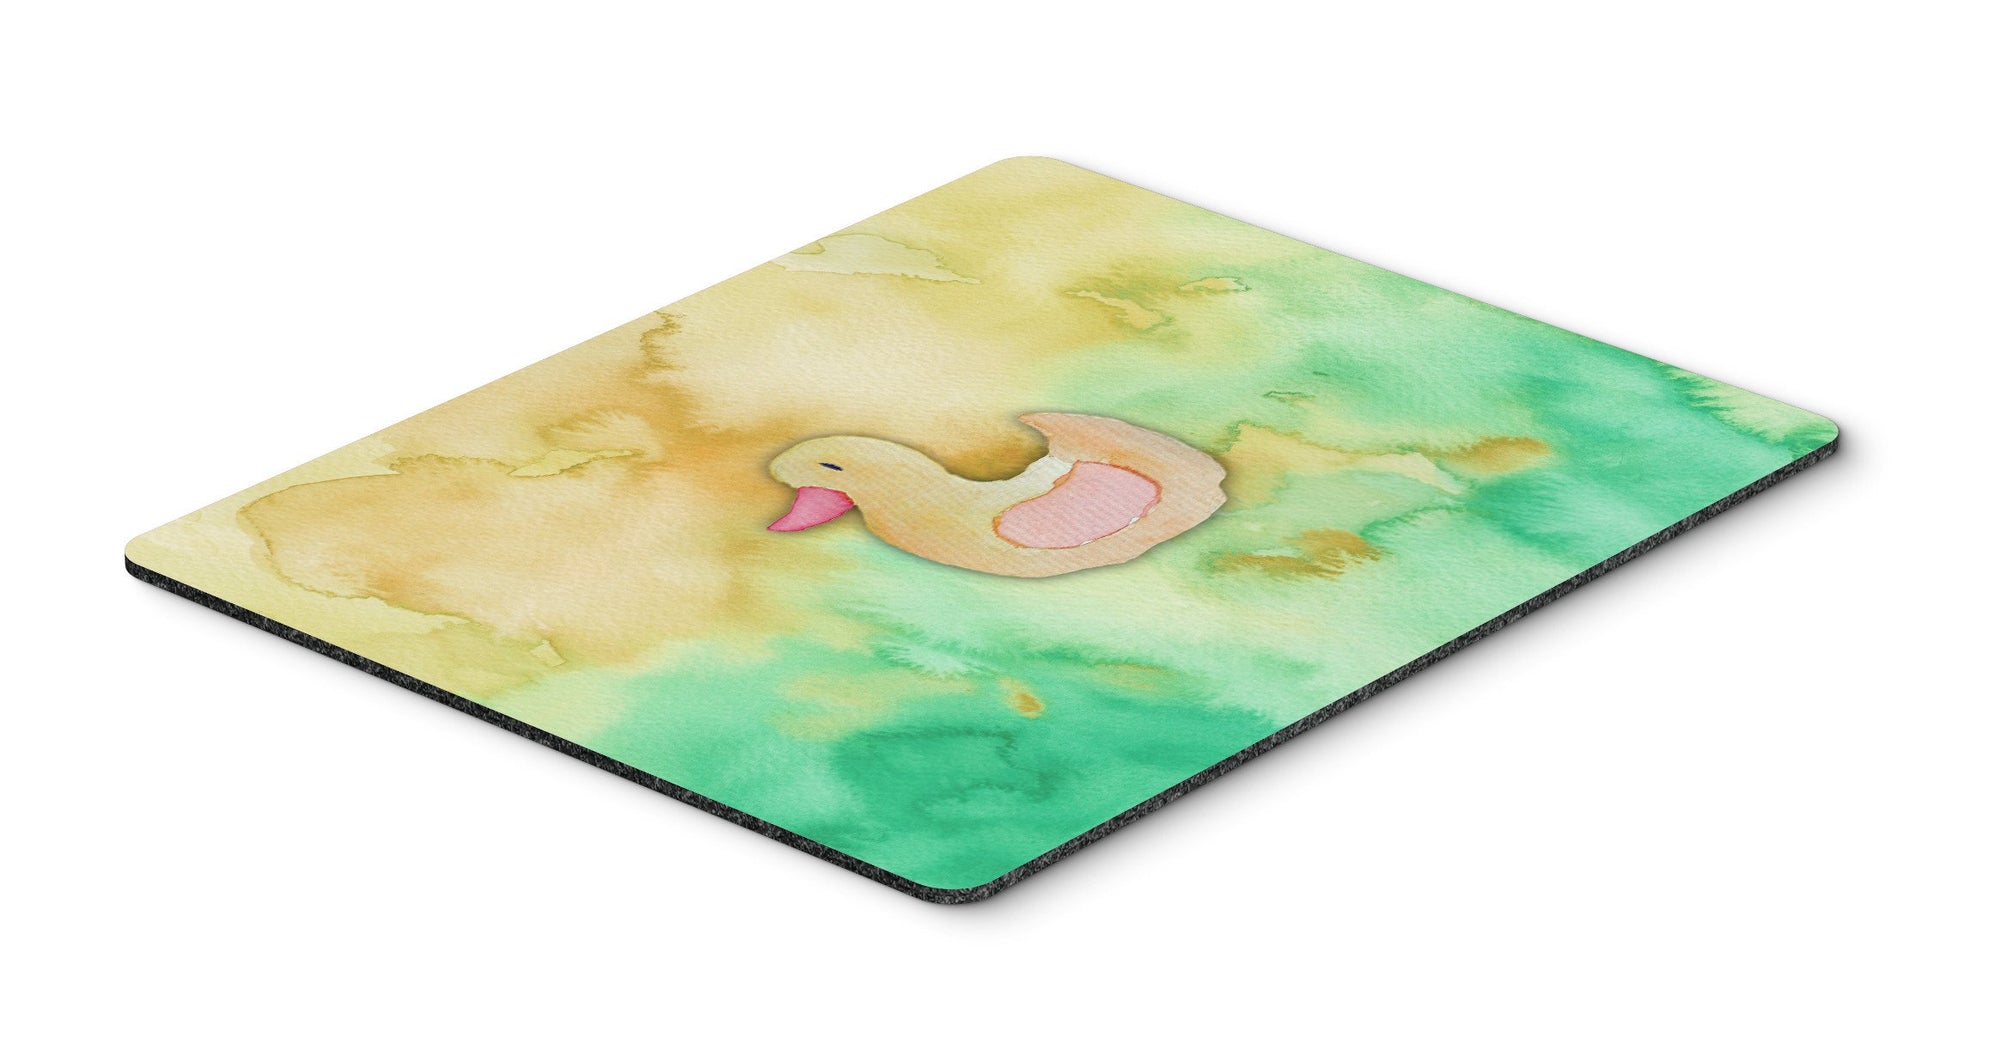 Rubber Duckie Watercolor Mouse Pad, Hot Pad or Trivet BB7351MP by Caroline's Treasures